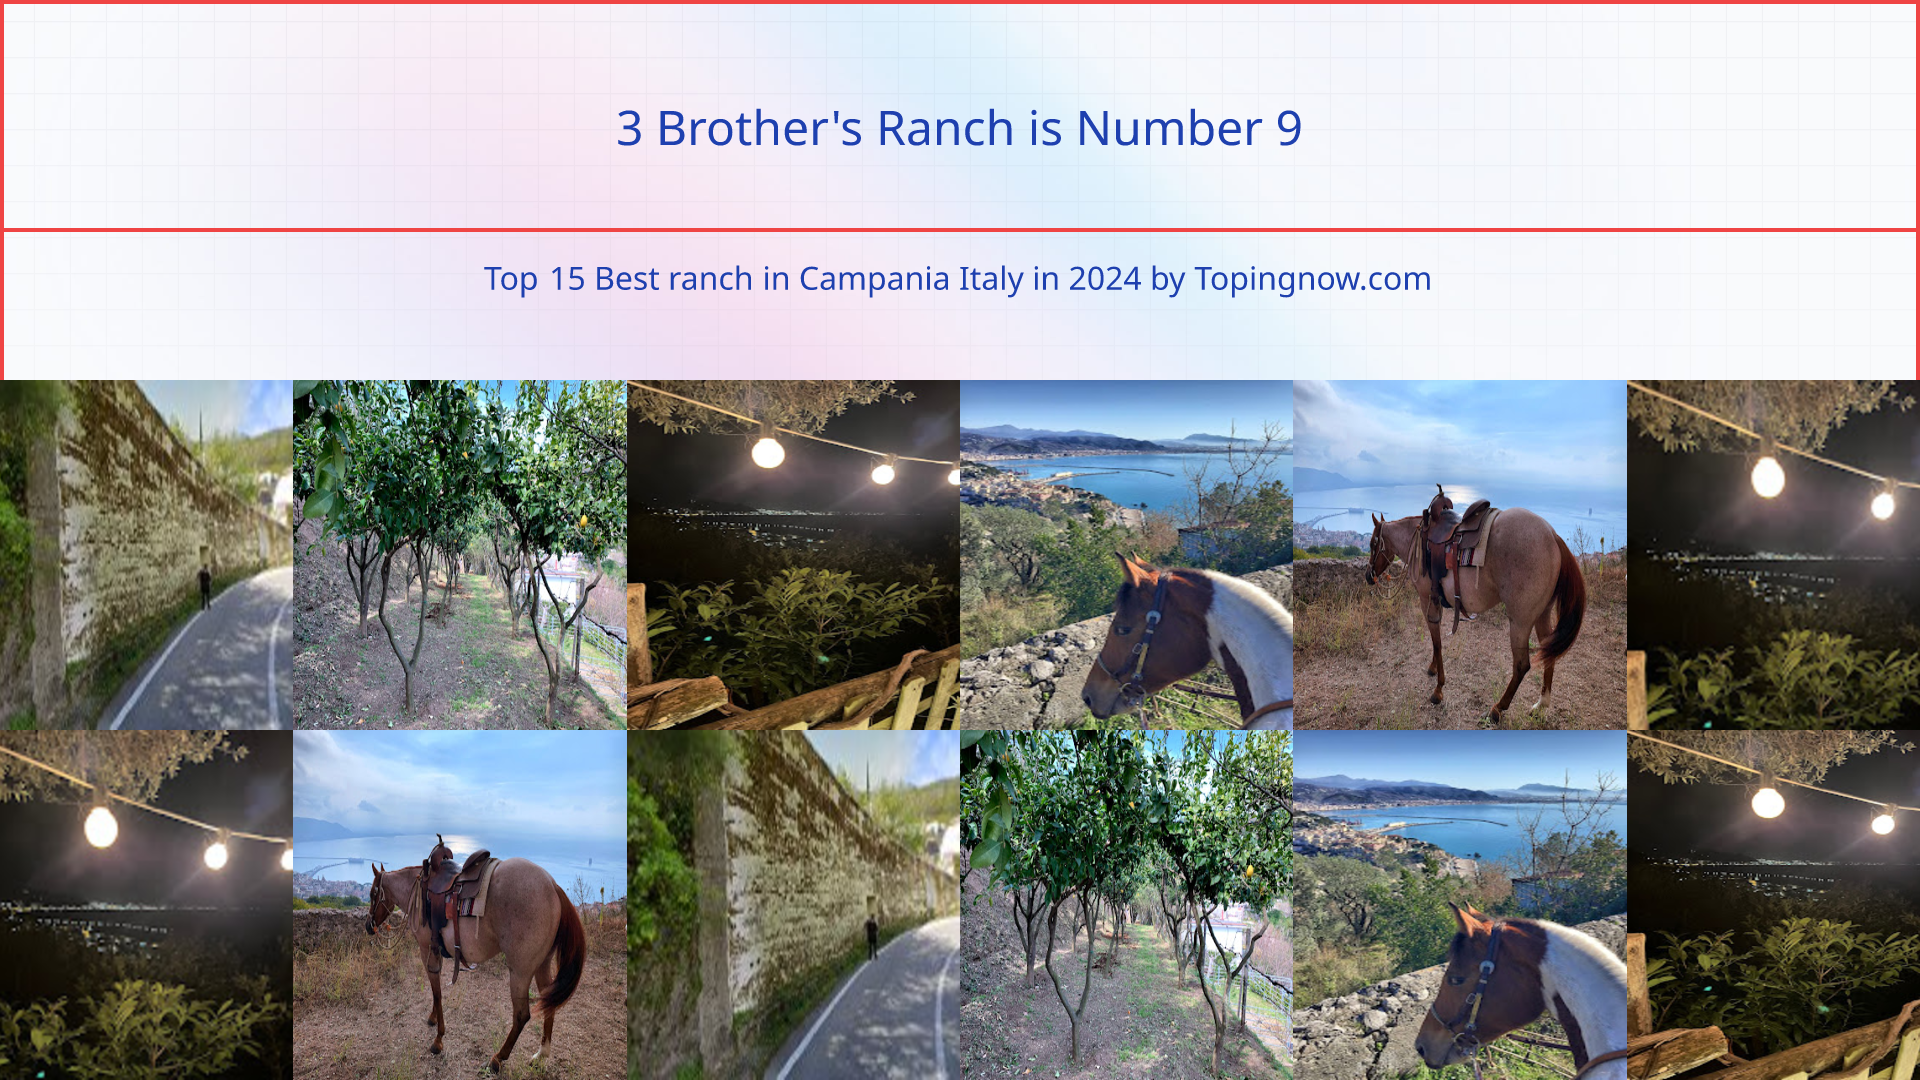 3 Brother's Ranch: Top 15 Best ranch in Campania Italy in 2024